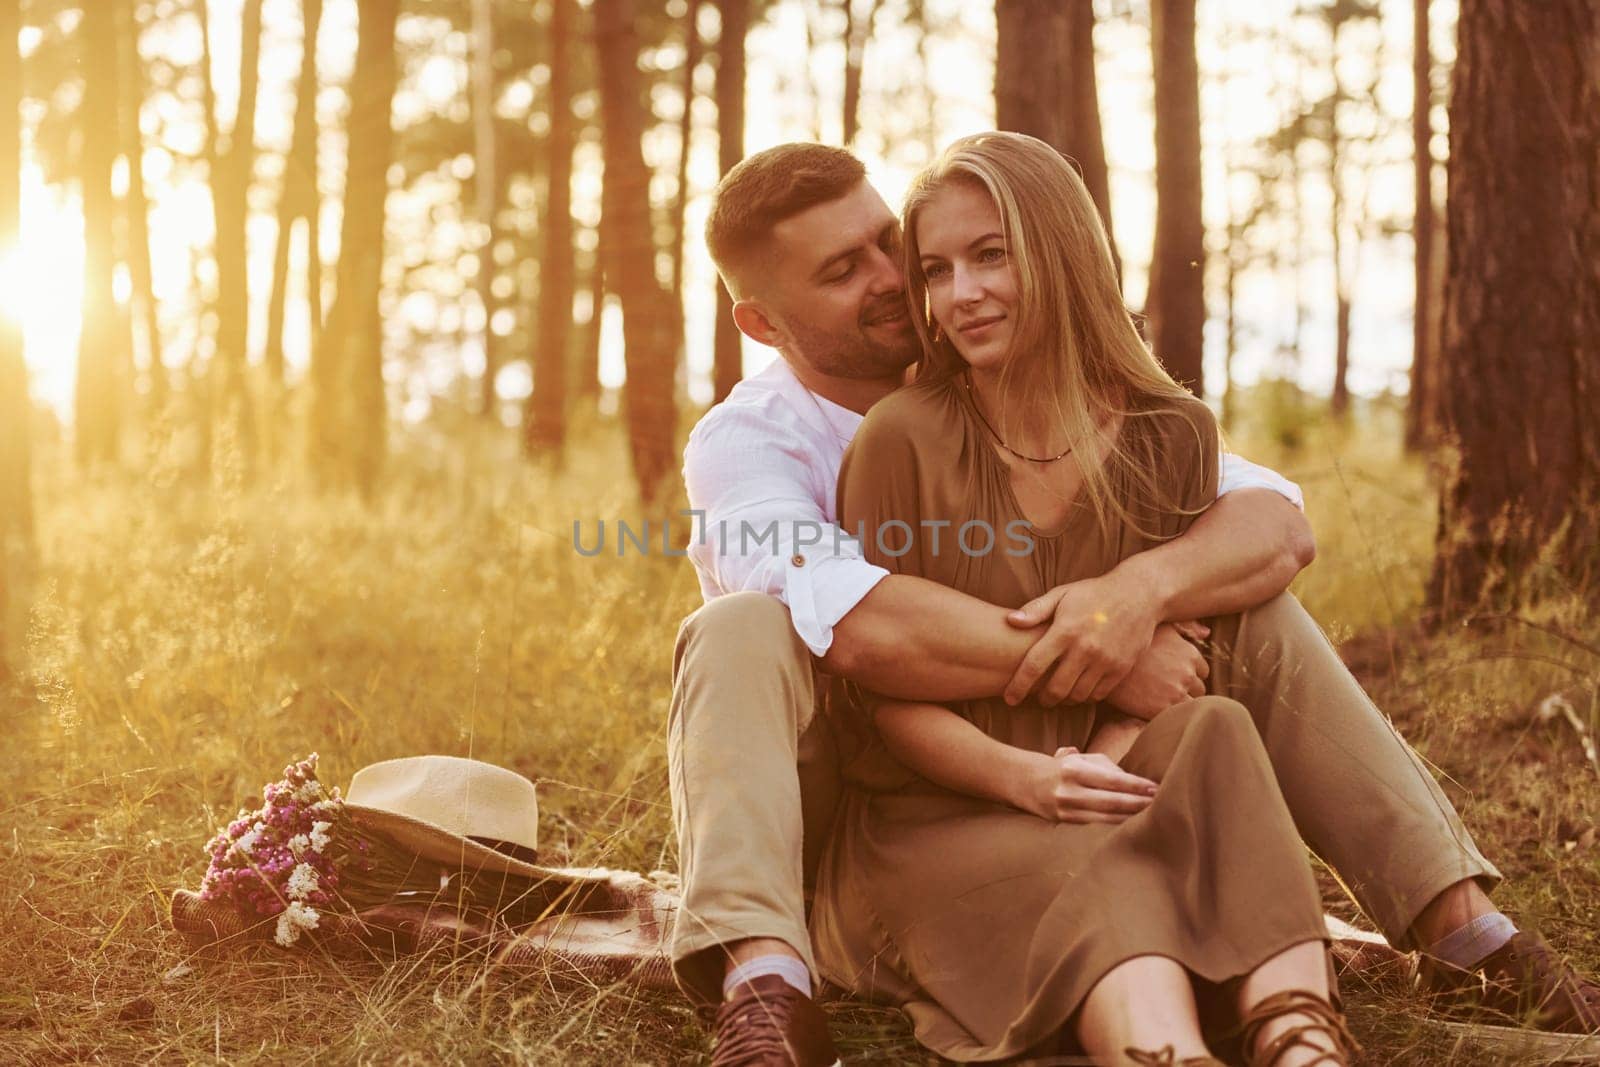 Sitting and embracing each other. Happy couple is outdoors in the forest at daytime by Standret